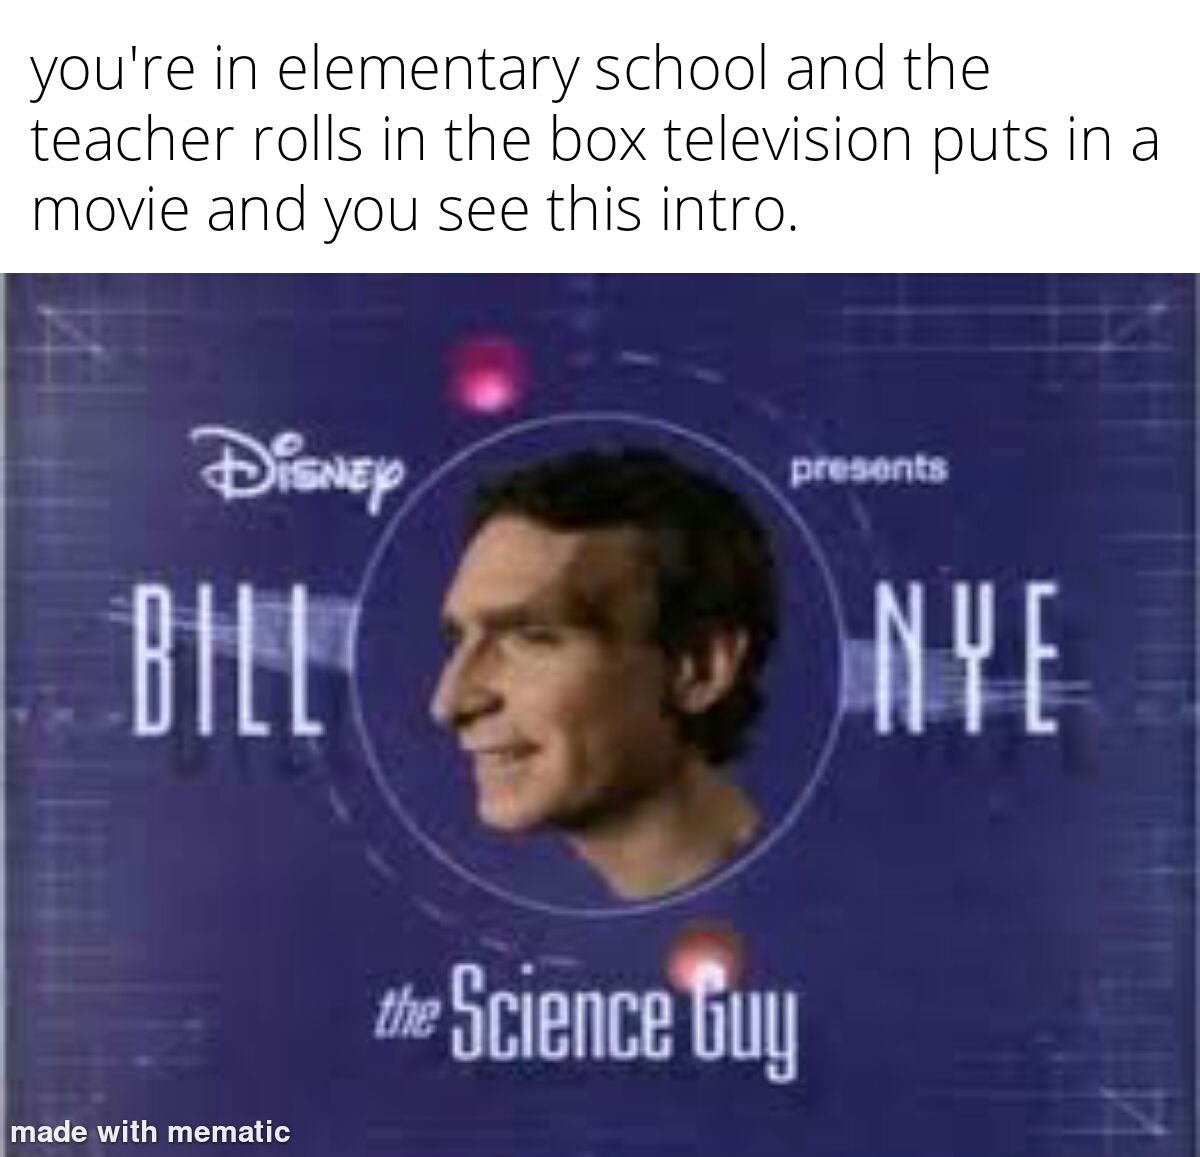 album cover - you're in elementary school and the teacher rolls in the box television puts in a movie and you see this intro. Disney presents Bill Nye the Science Guy made with mematic